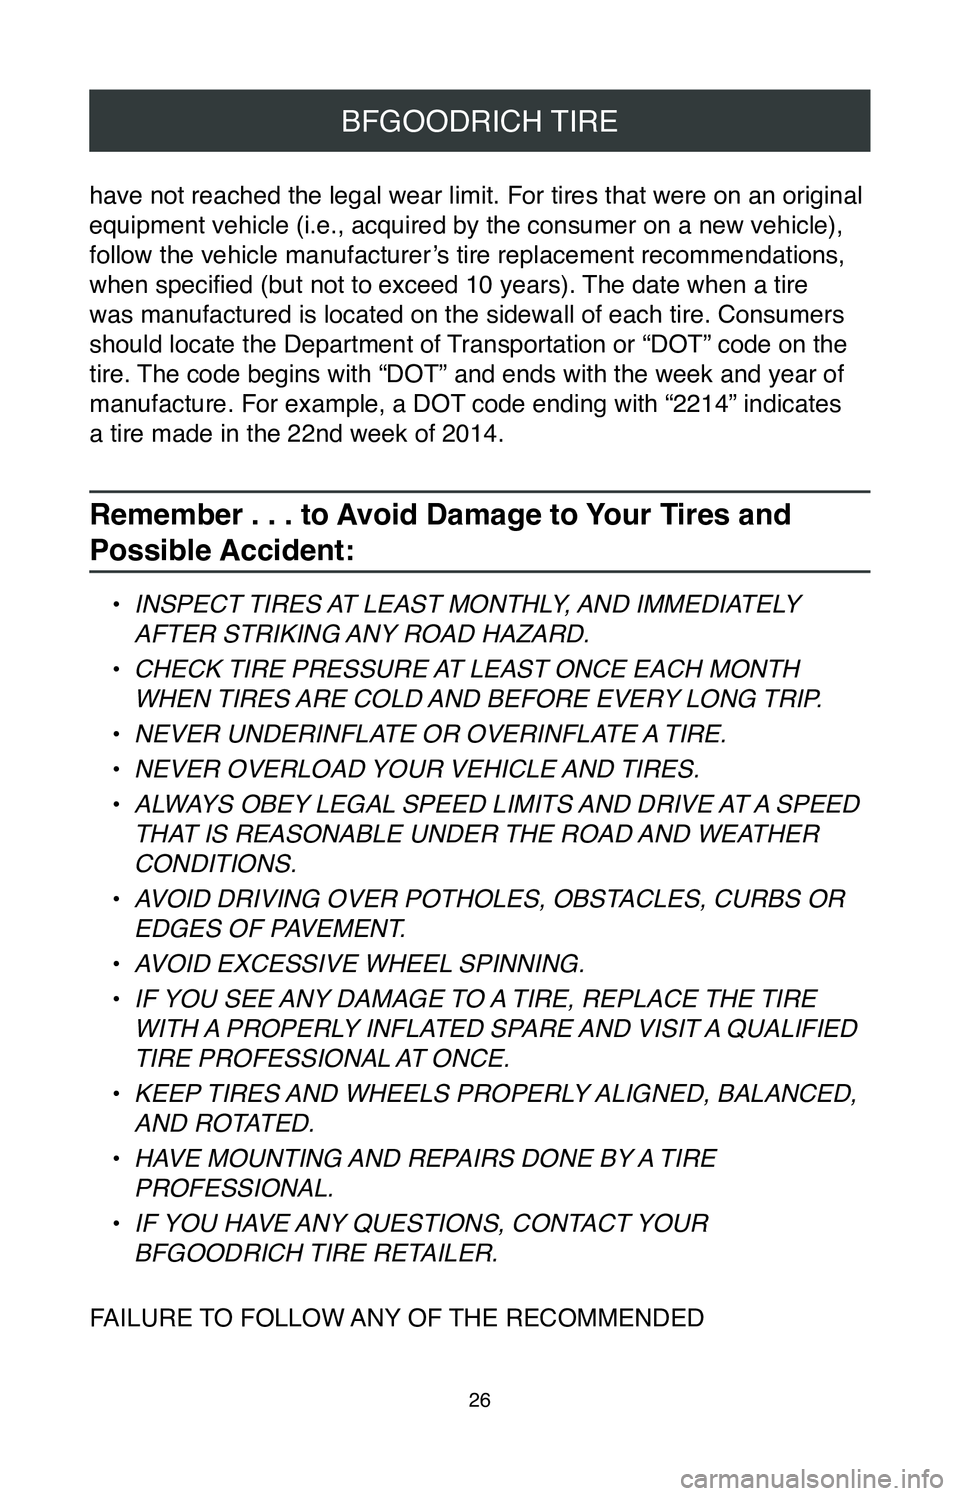 TOYOTA COROLLA HATCHBACK 2020  Warranties & Maintenance Guides (in English) 26
BFGOODRICH TIRE
have not reached the legal wear limit. For tires that were on an origina\
l 
equipment vehicle (i.e., acquired by the consumer on a new vehicle), 
follow the vehicle manufacturer’